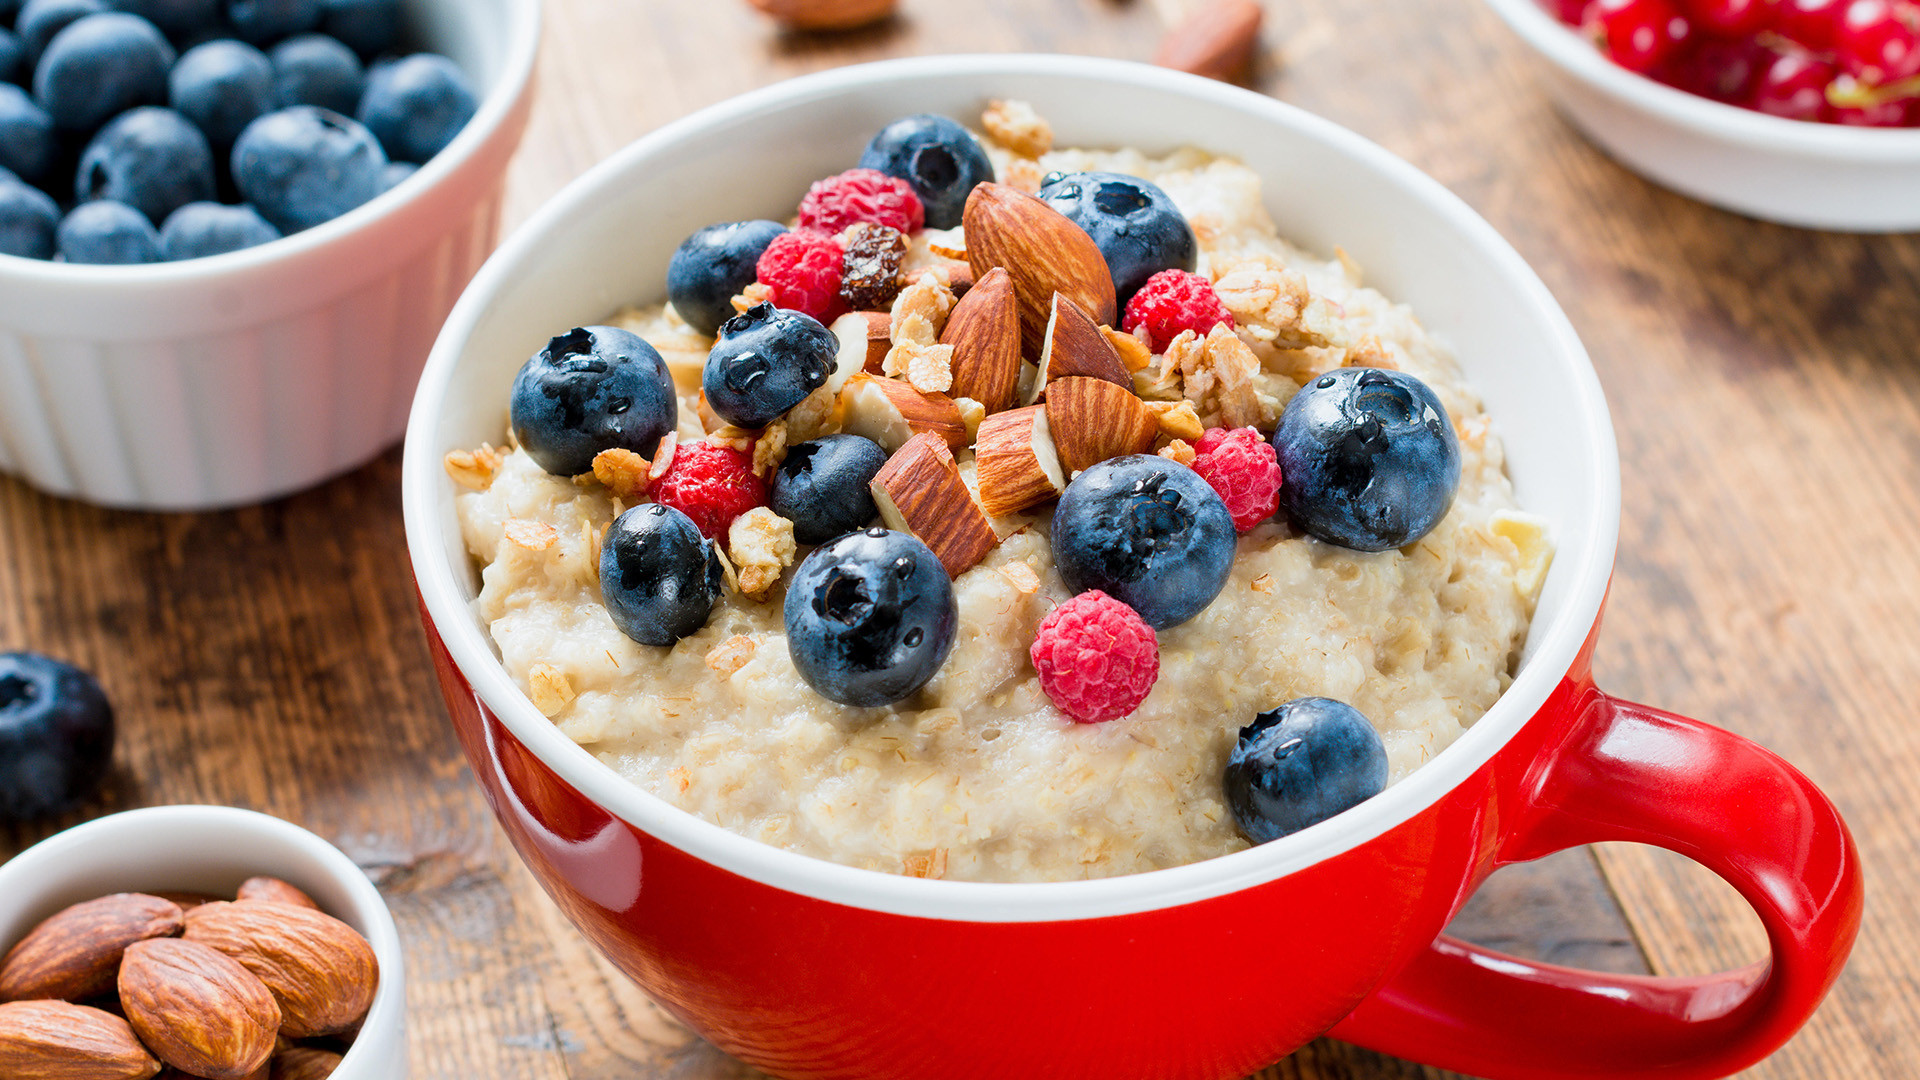 Healthy Oatmeal Breakfast Top 5 Oats Benefits And Why To Eat Them Regularly Fitneass